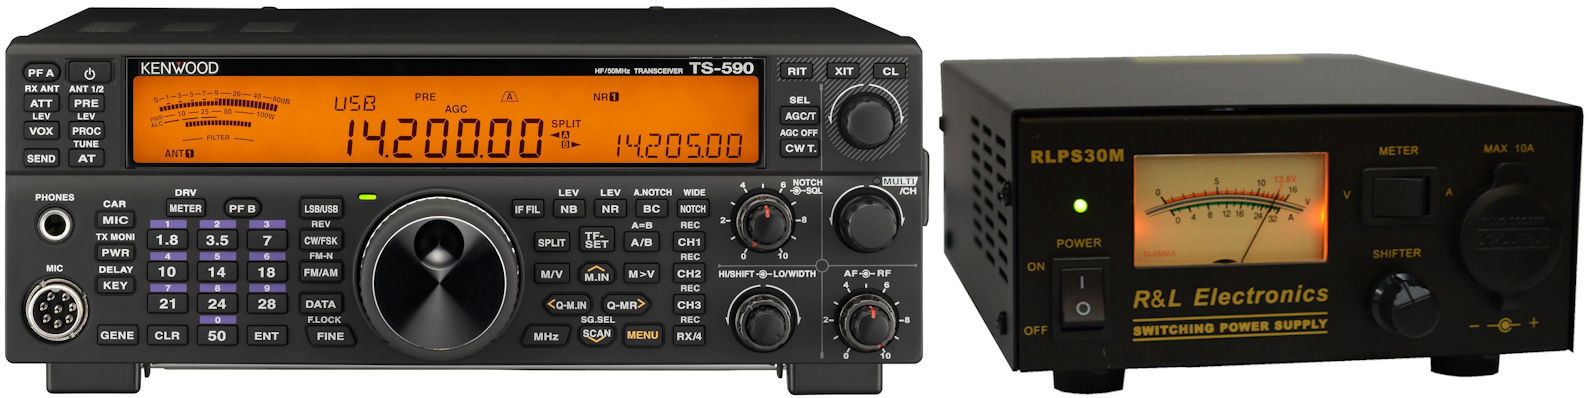 KENWOOD TS590SGRLPS30M - Click Image to Close